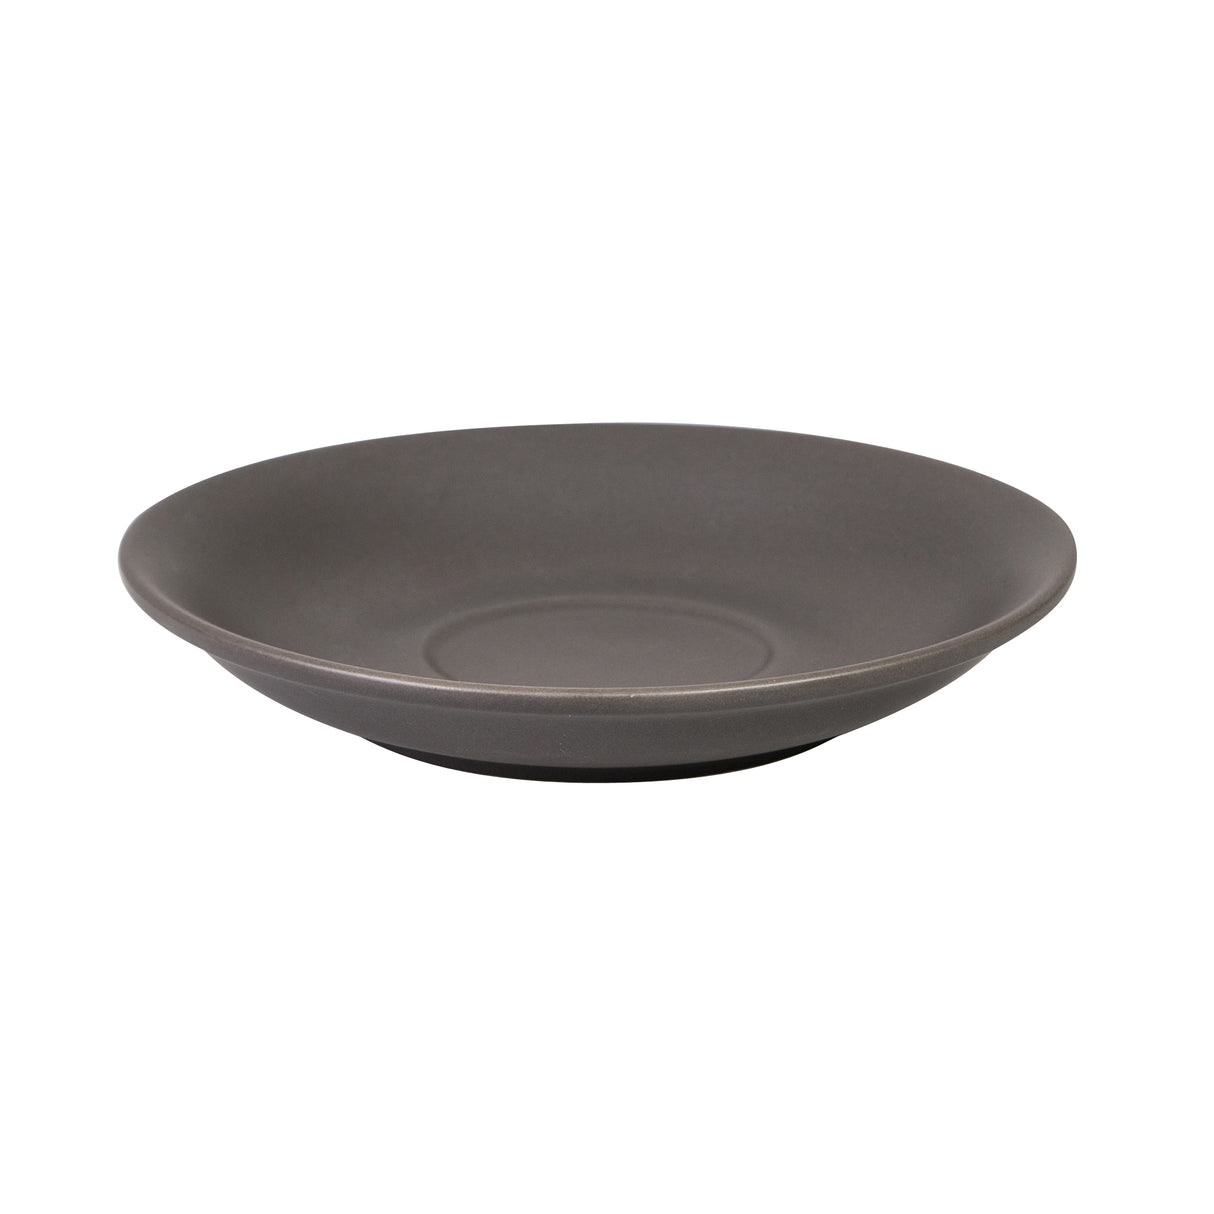 Saucer - Slate, 140mm, Universal from Bevande. made out of Porcelain and sold in boxes of 6. Hospitality quality at wholesale price with The Flying Fork! 